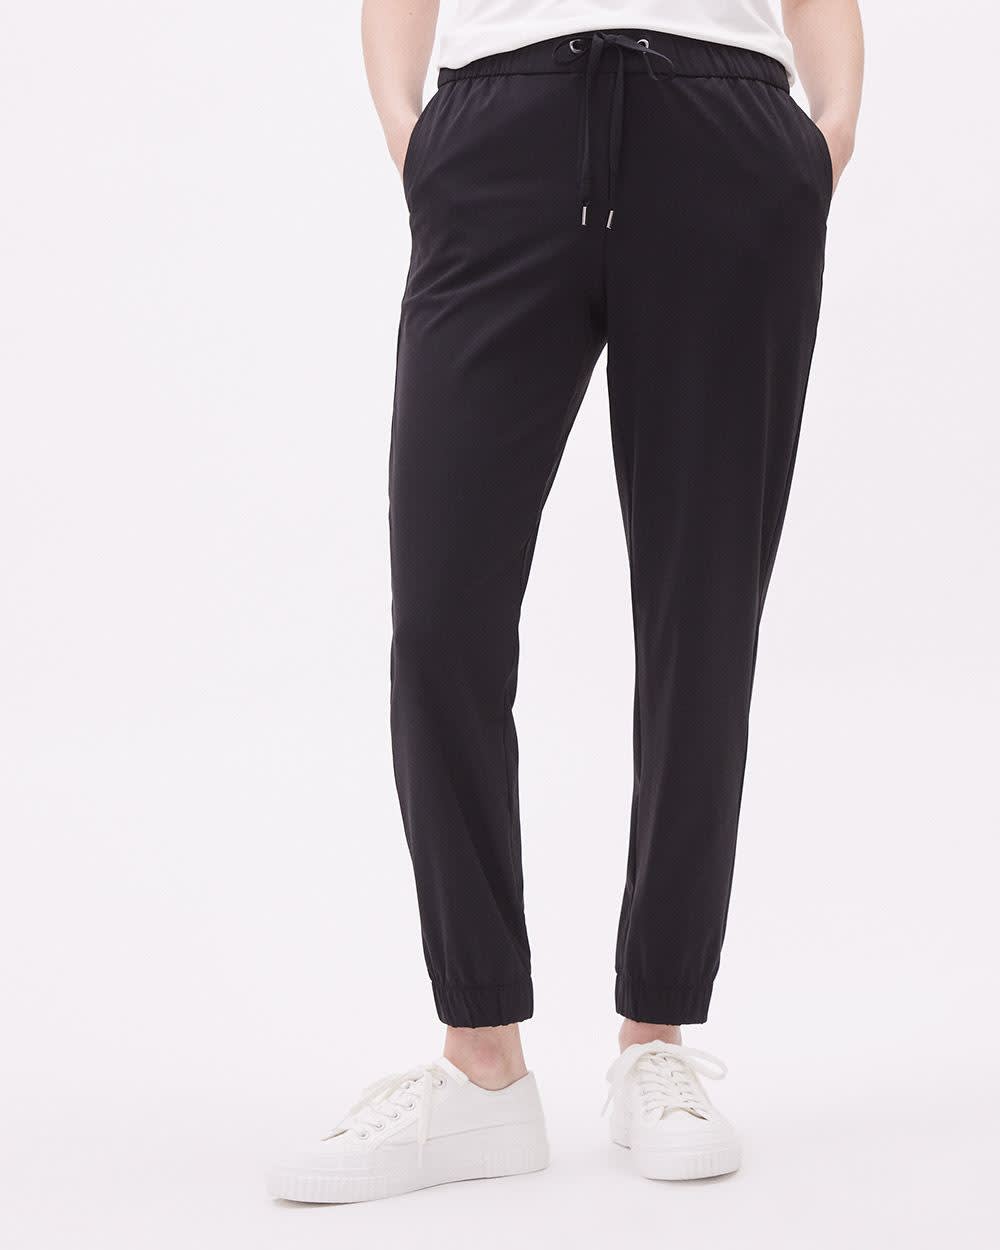 4-Way Stretch Jogger Ankle Pant - 28.5